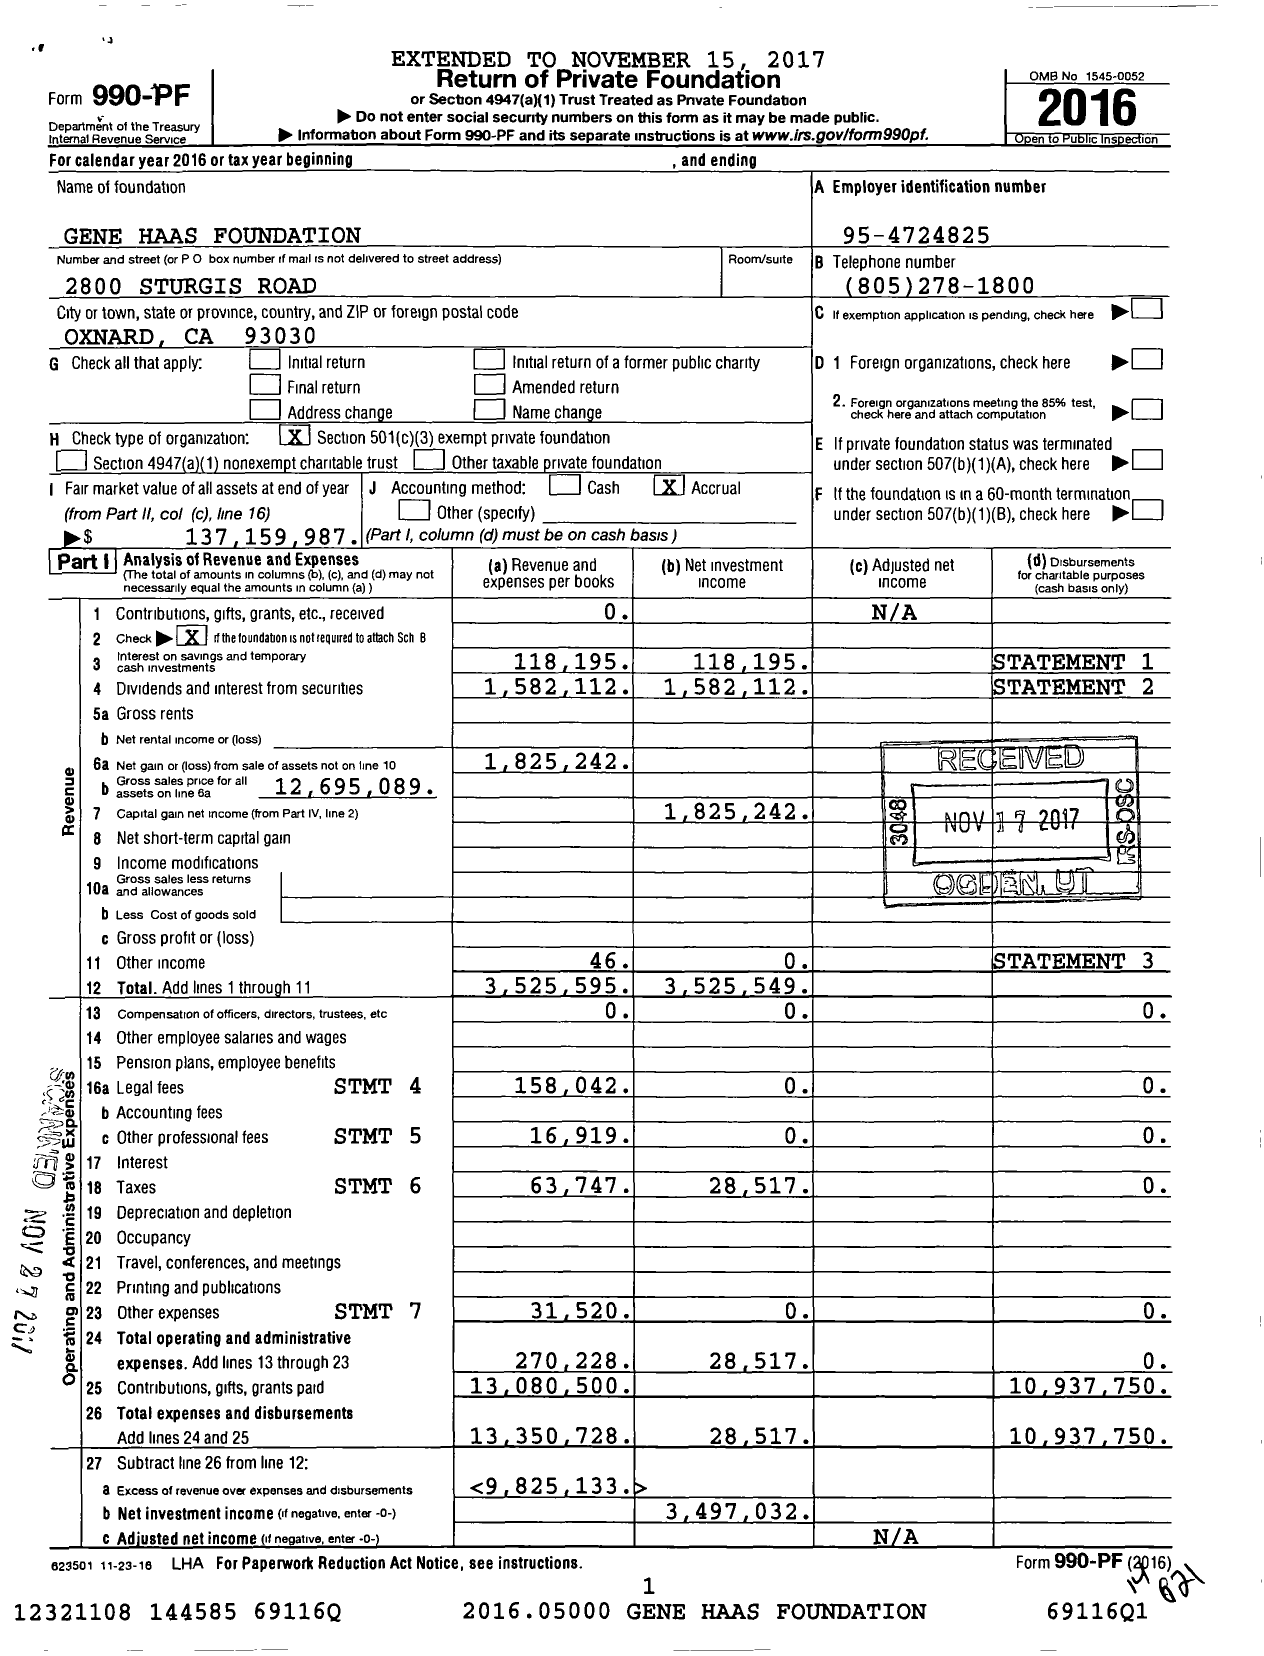 Image of first page of 2016 Form 990PF for Gene Haas Foundation